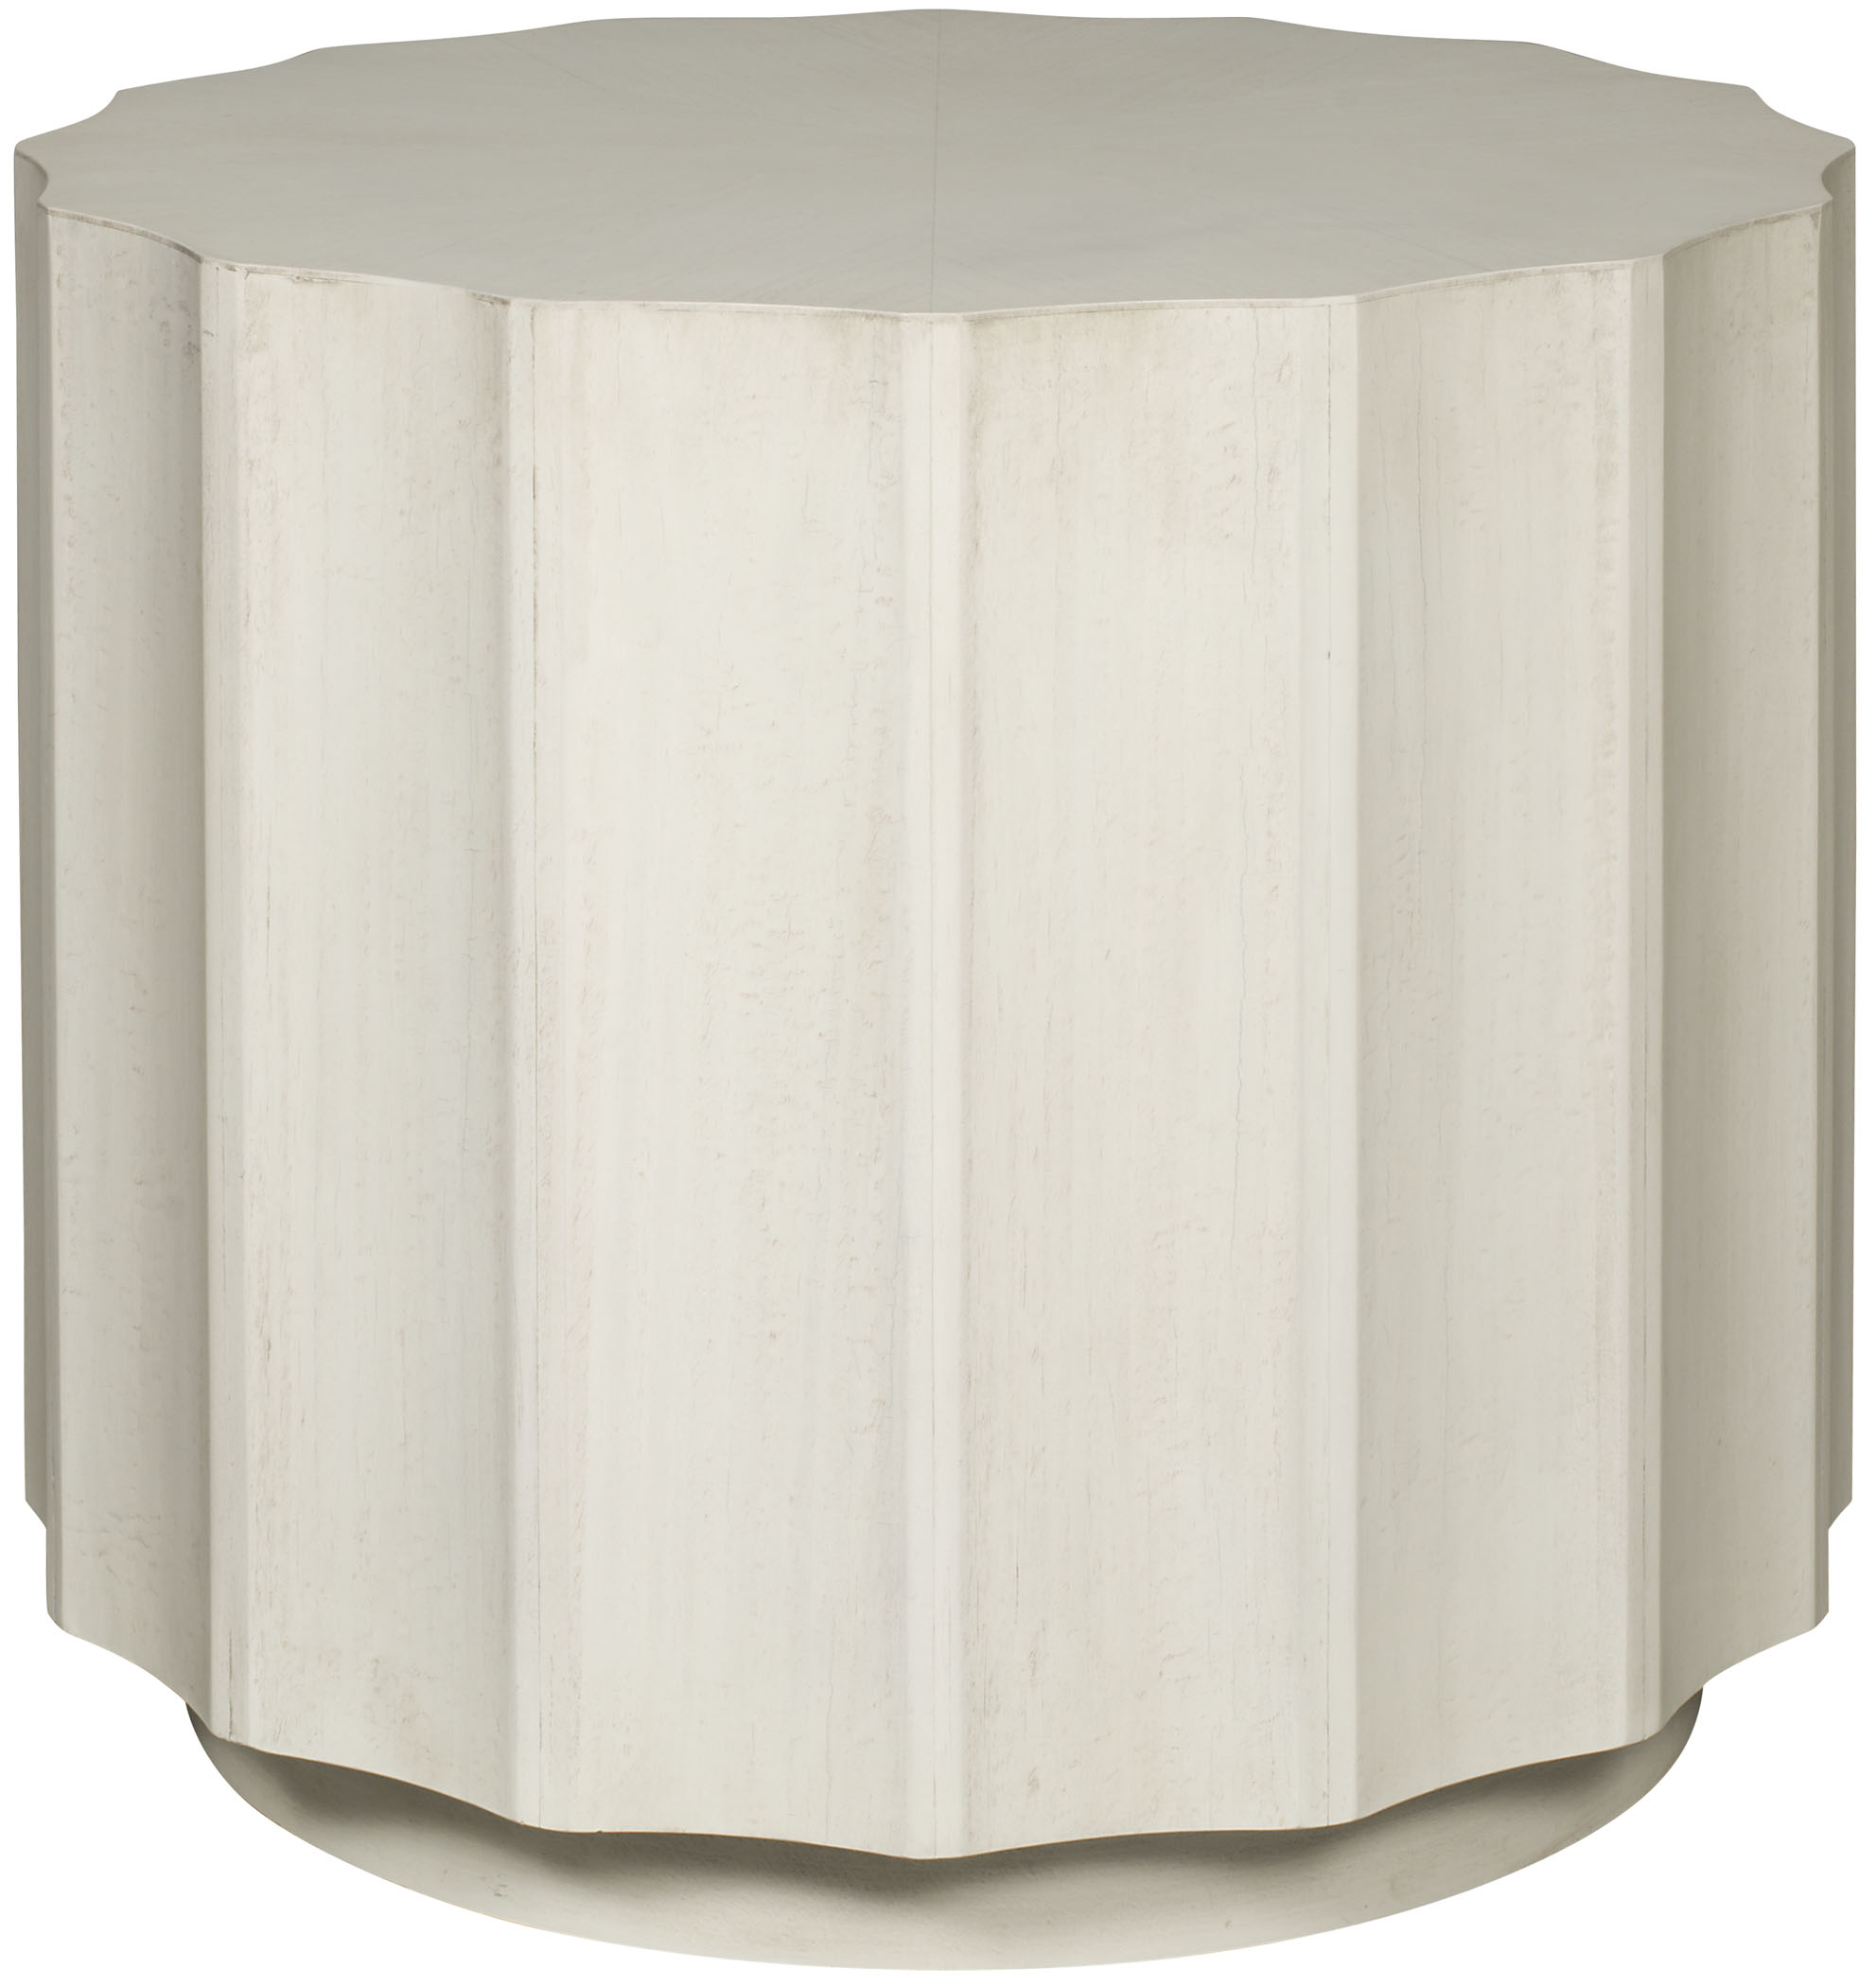 Vanguard Furniture - Our Products - P241L Ava Side Table